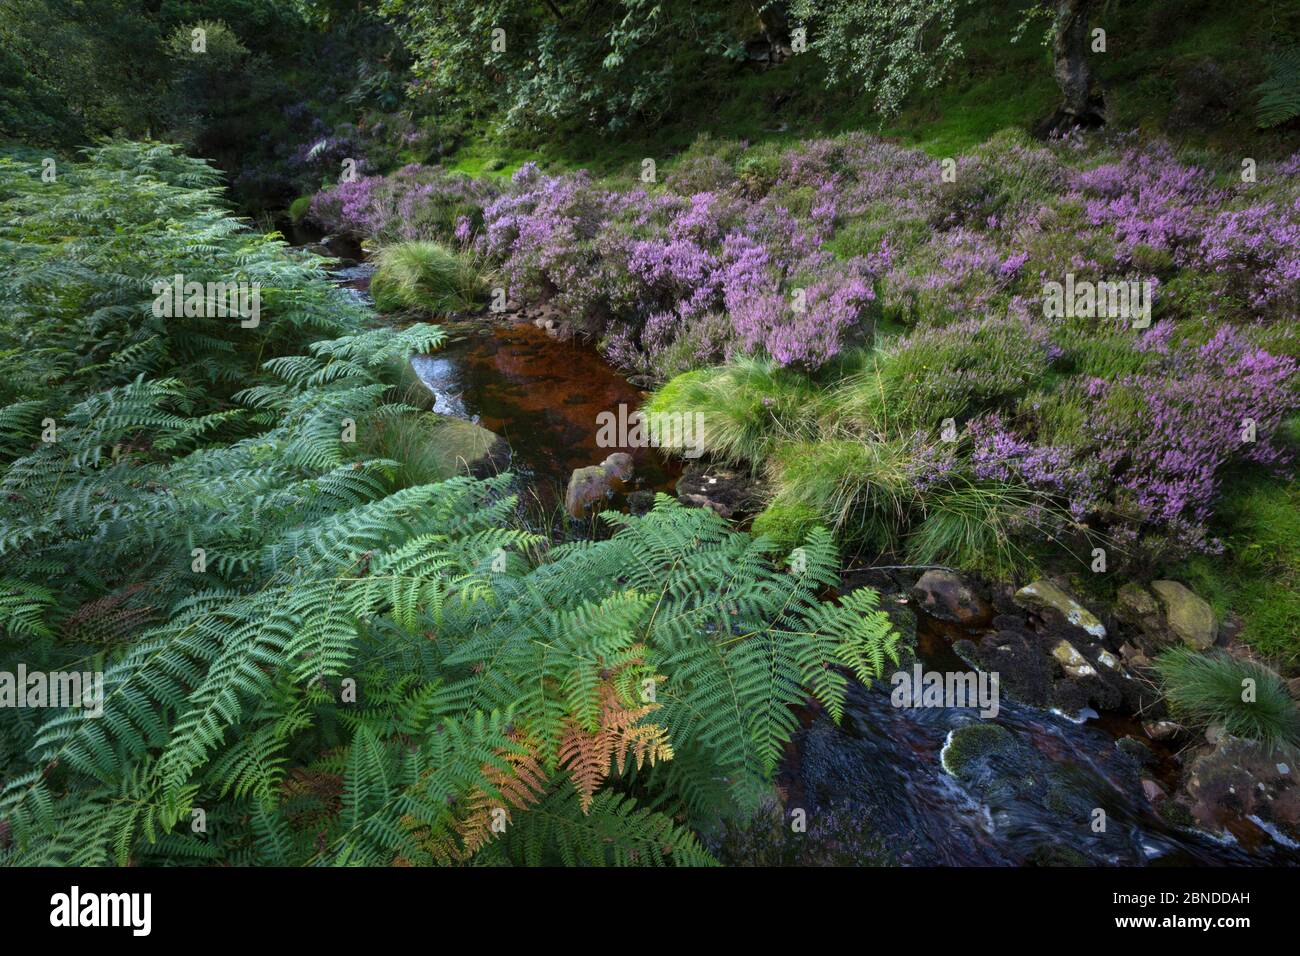 Bracken (Pteridium aquilinum), heather and tannin-stained brook, Stainery Clough, Peak District National Park, Derbyshire, UK. August 2015. Stock Photo